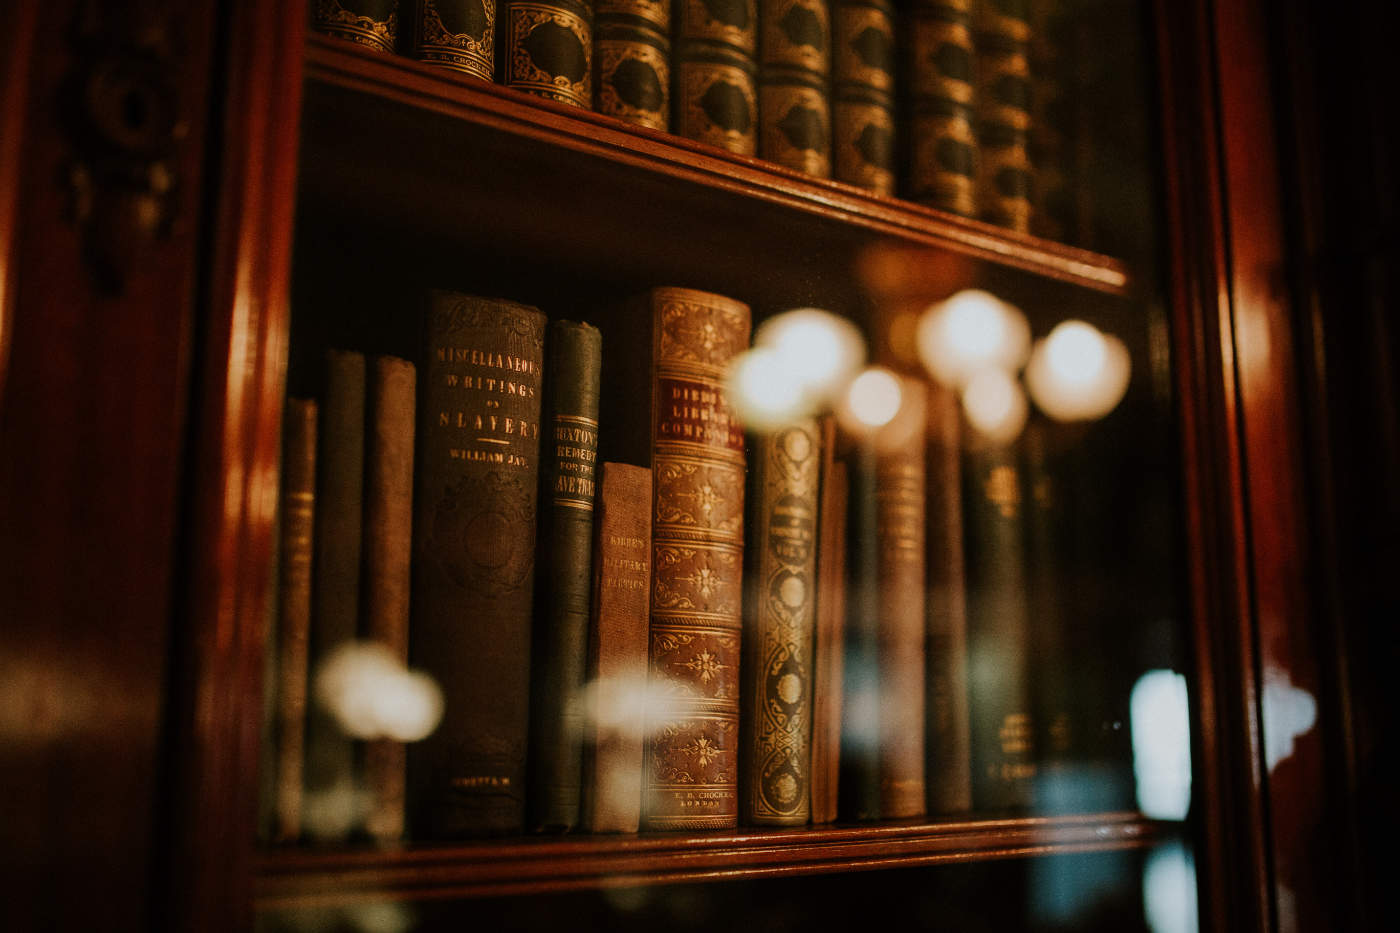 A collection of old books with gold lettering on the spine is displayed in a wooden bookcase behind glass, with soft, warm lights reflecting off the surface.